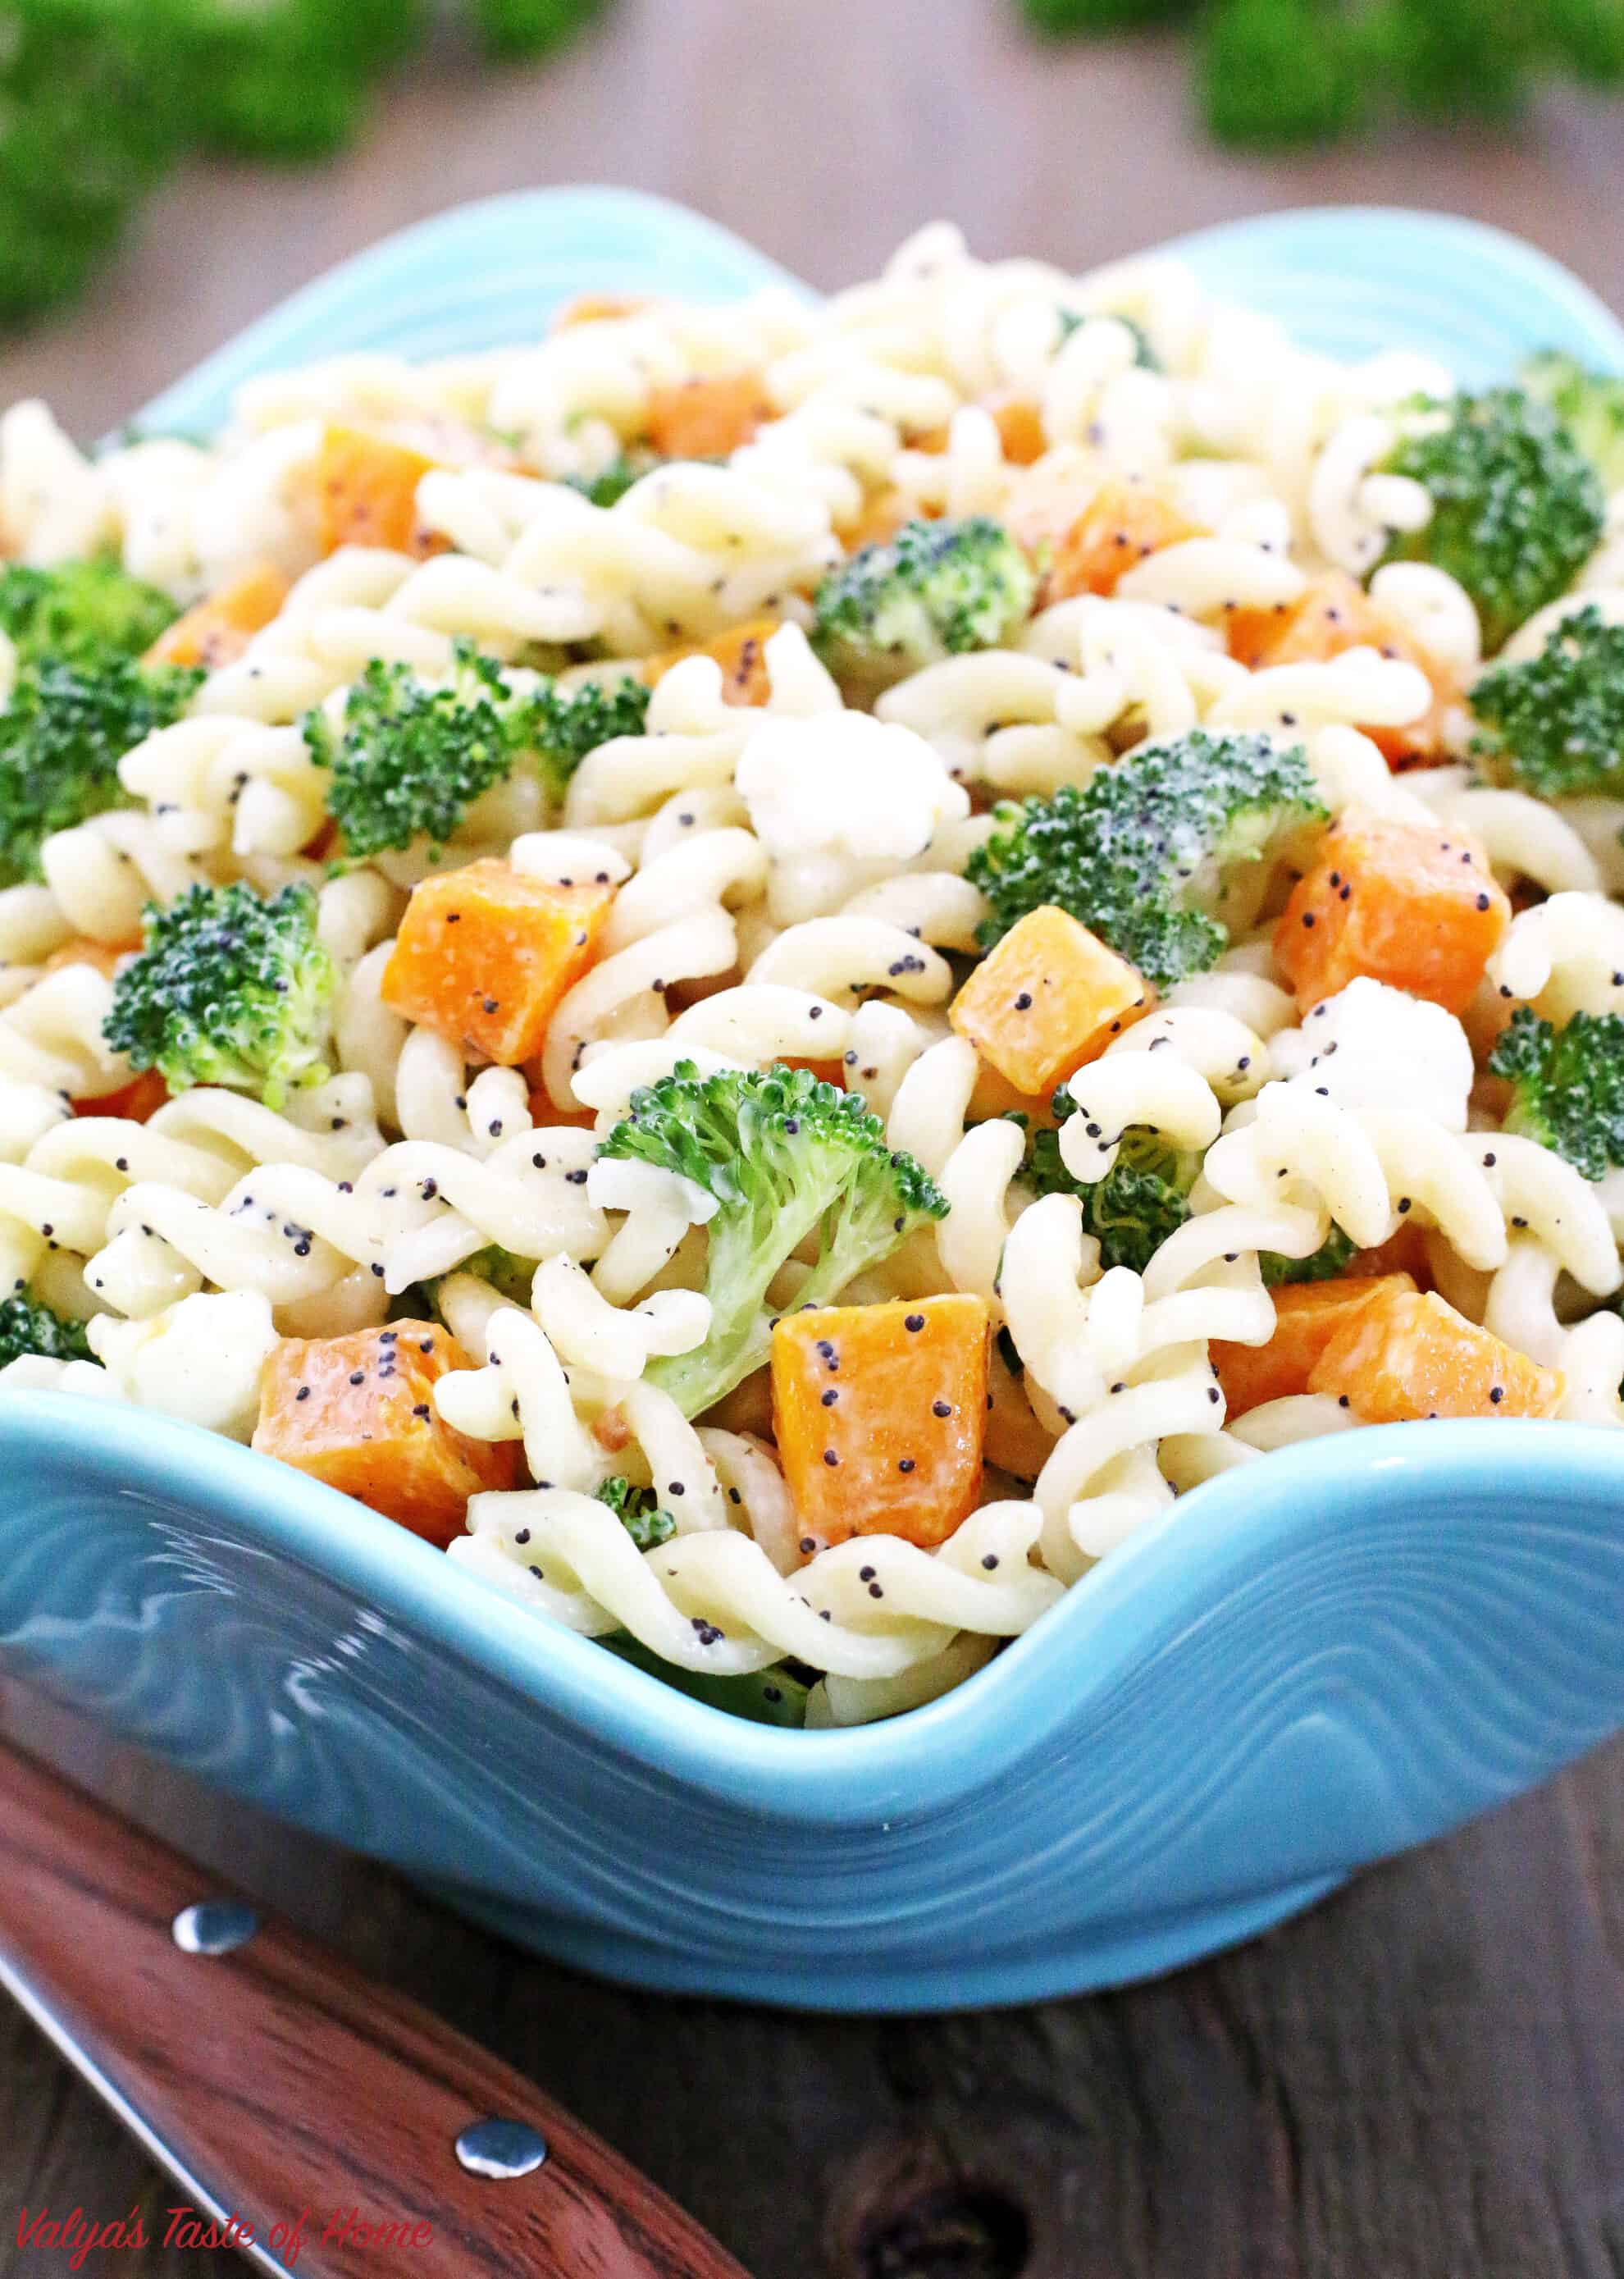 This make ahead, and crowd-pleasing of the Butternut Squash Pasta Salad side dis is another gem in a Thanksgiving spread. Or any gathering, really. Organic pasta tossed with fresh broccoli, cauliflower, roasted butternut squash and dressed with homemade ranch makes this salad taste absolutely incredible! #butternutsquashpastasalad #winterpastasalad #thanksgivingpastasalad #coldfallpastasalad 